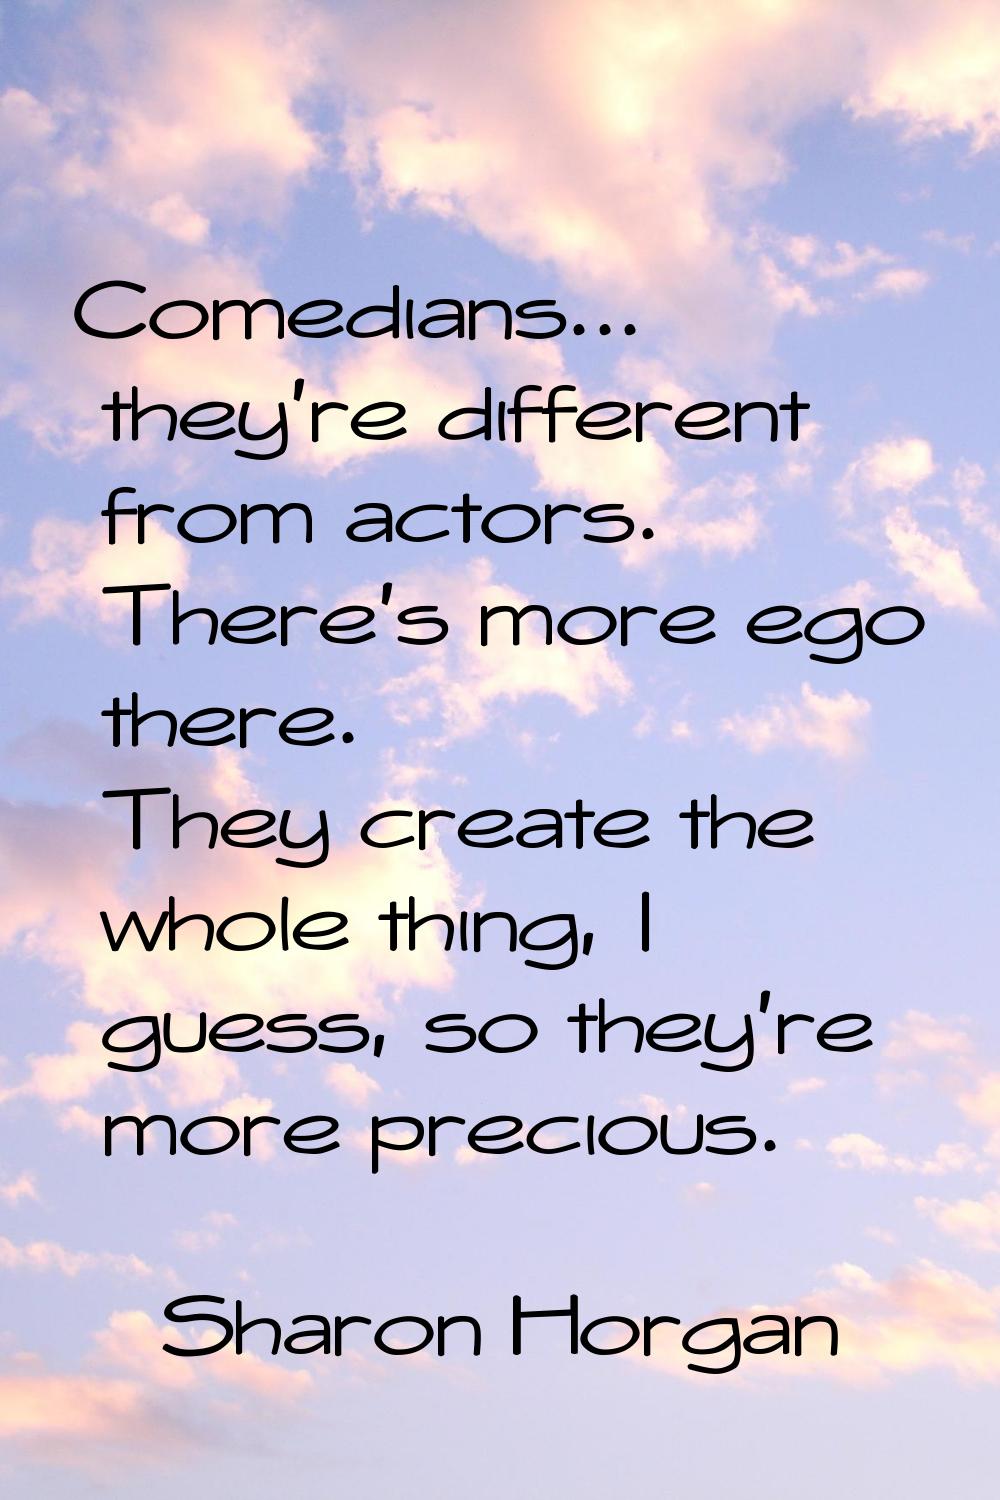 Comedians... they're different from actors. There's more ego there. They create the whole thing, I 